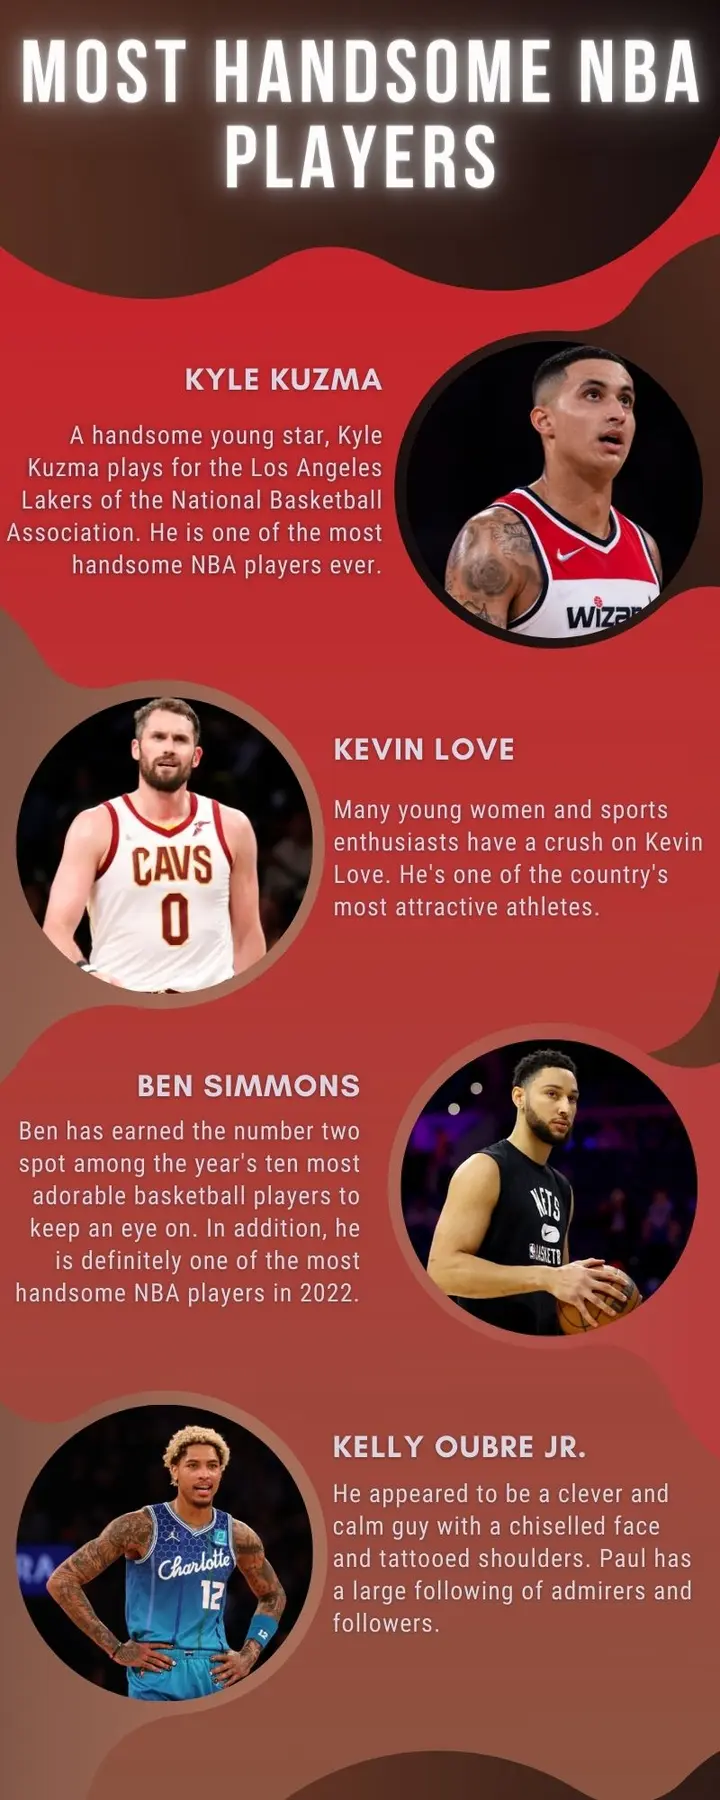 All-Hunk NBA teams: How the hottest pro basketball players are picked.